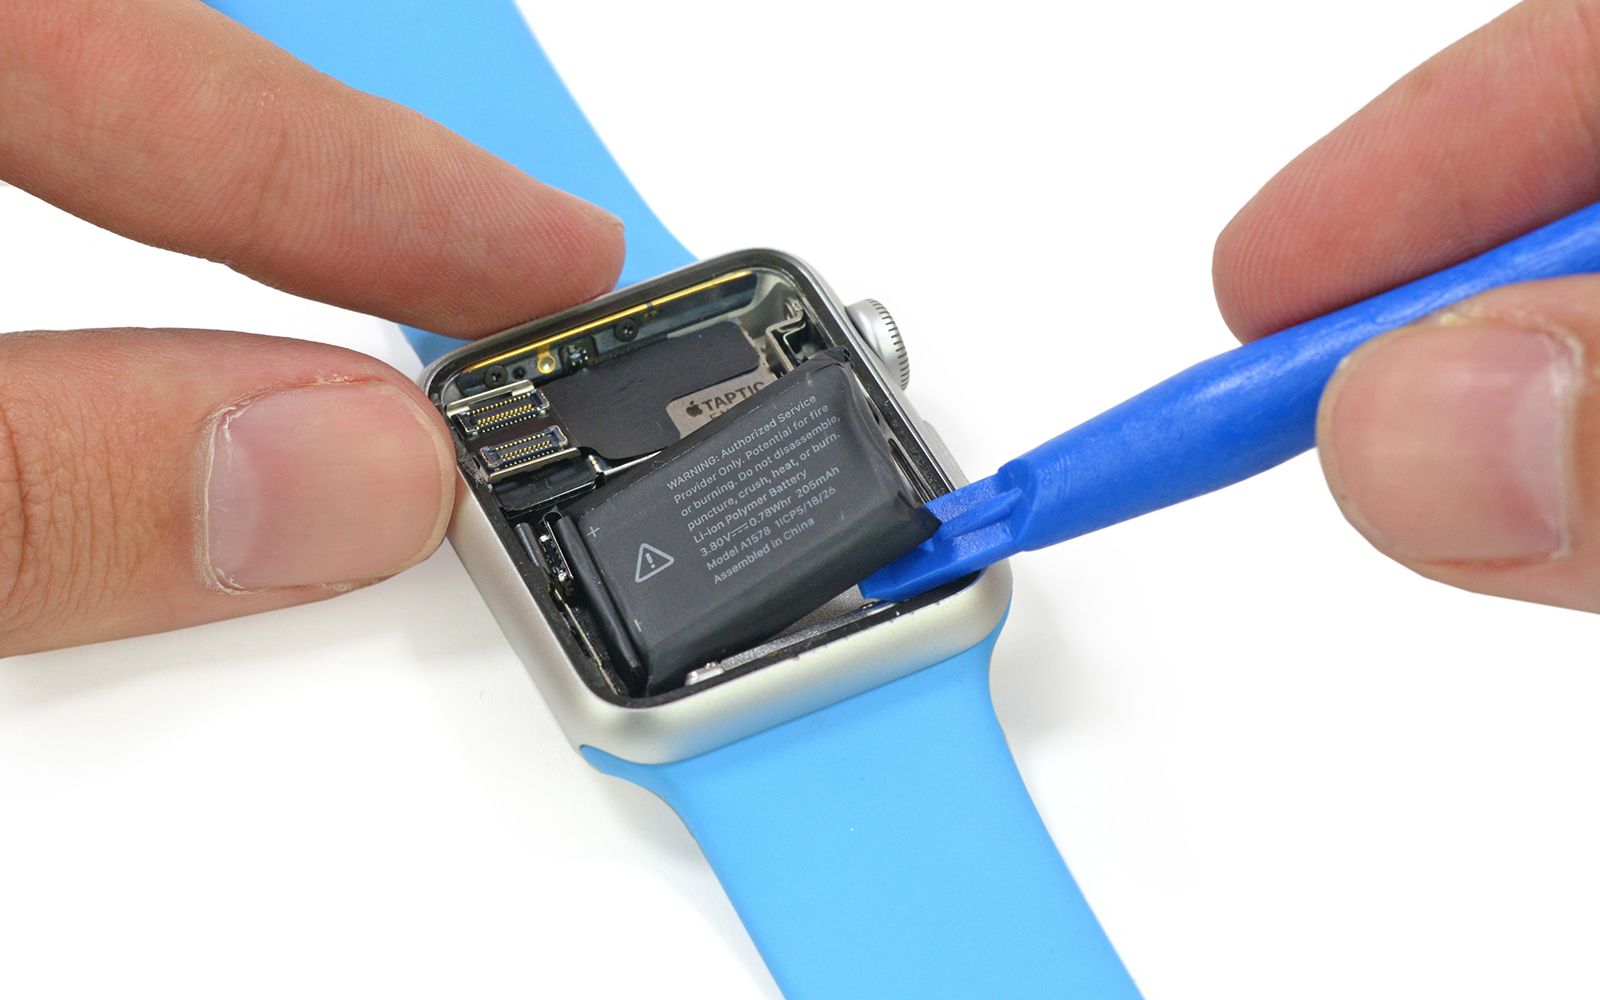 apple watch teardown could measure your blood oxygen battery loses to android wear and more image 2